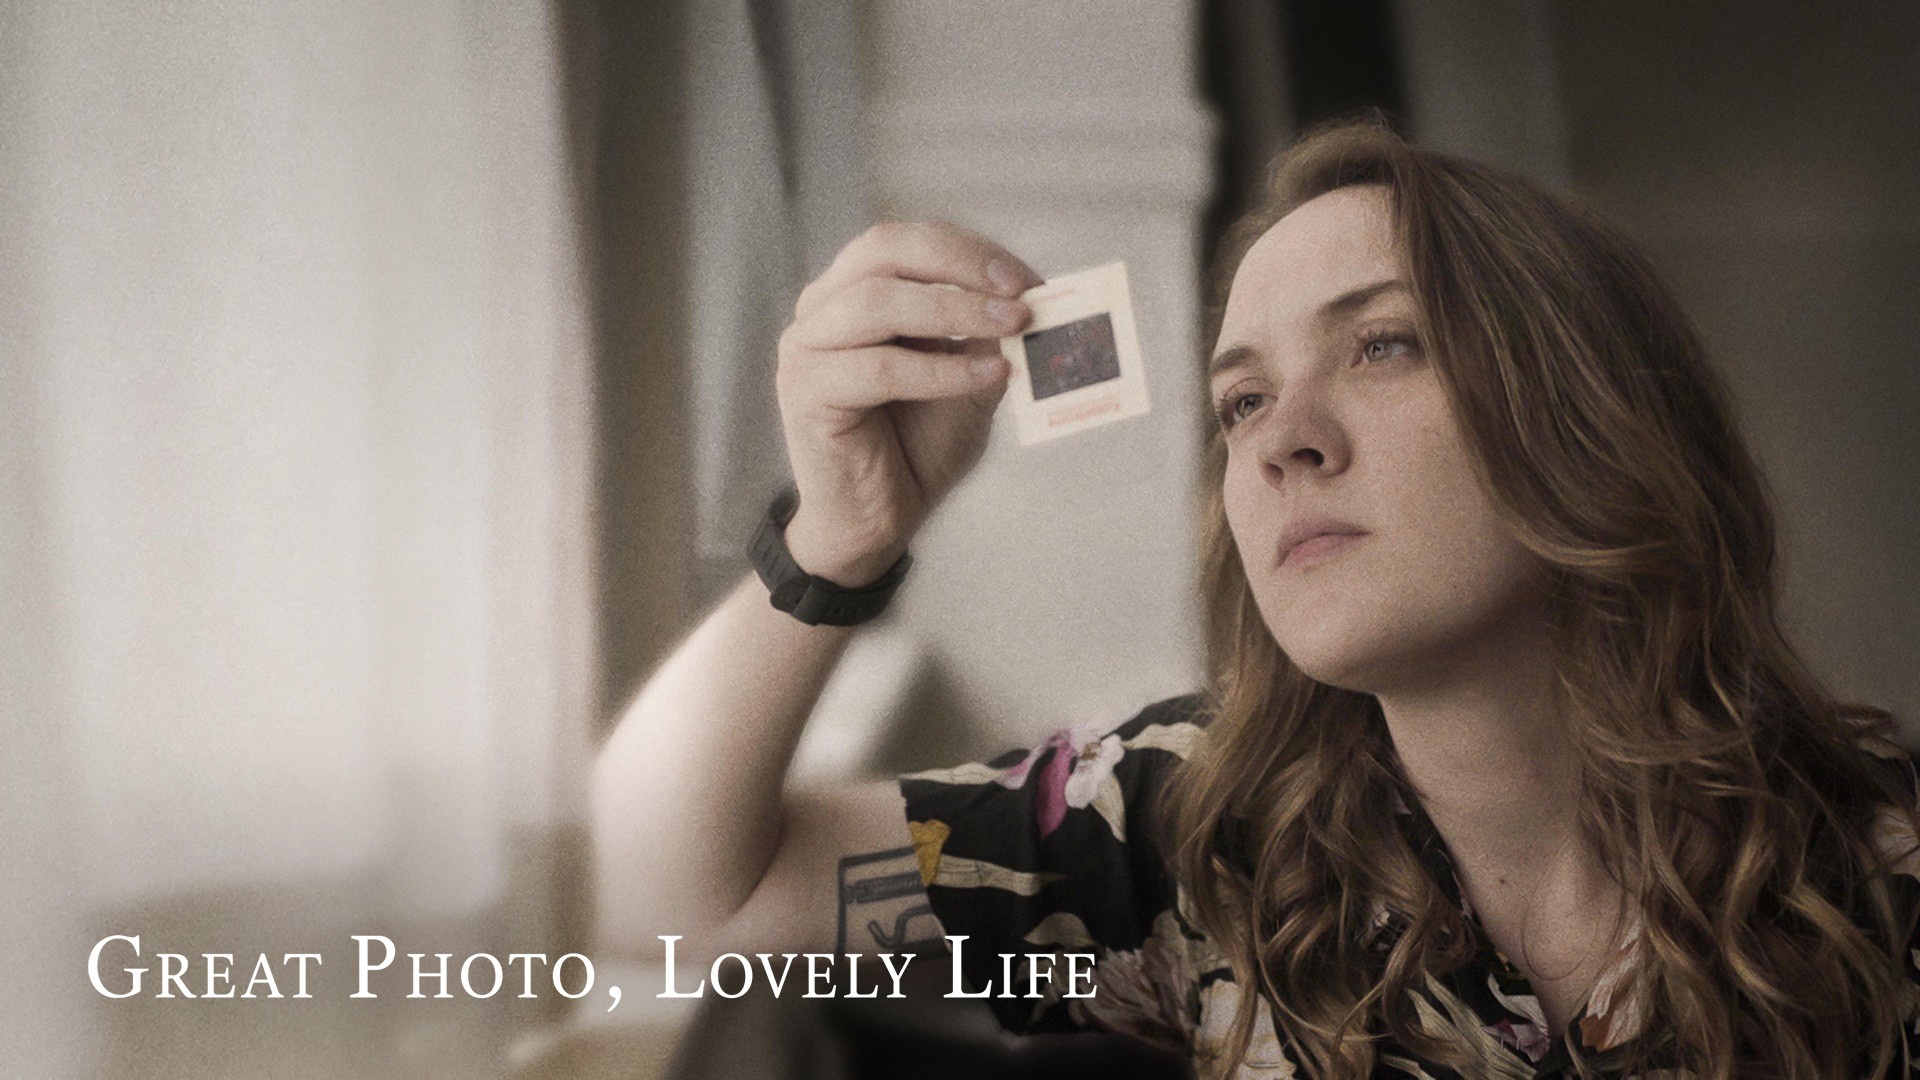 Great Photo, Lovely Life' Review: 